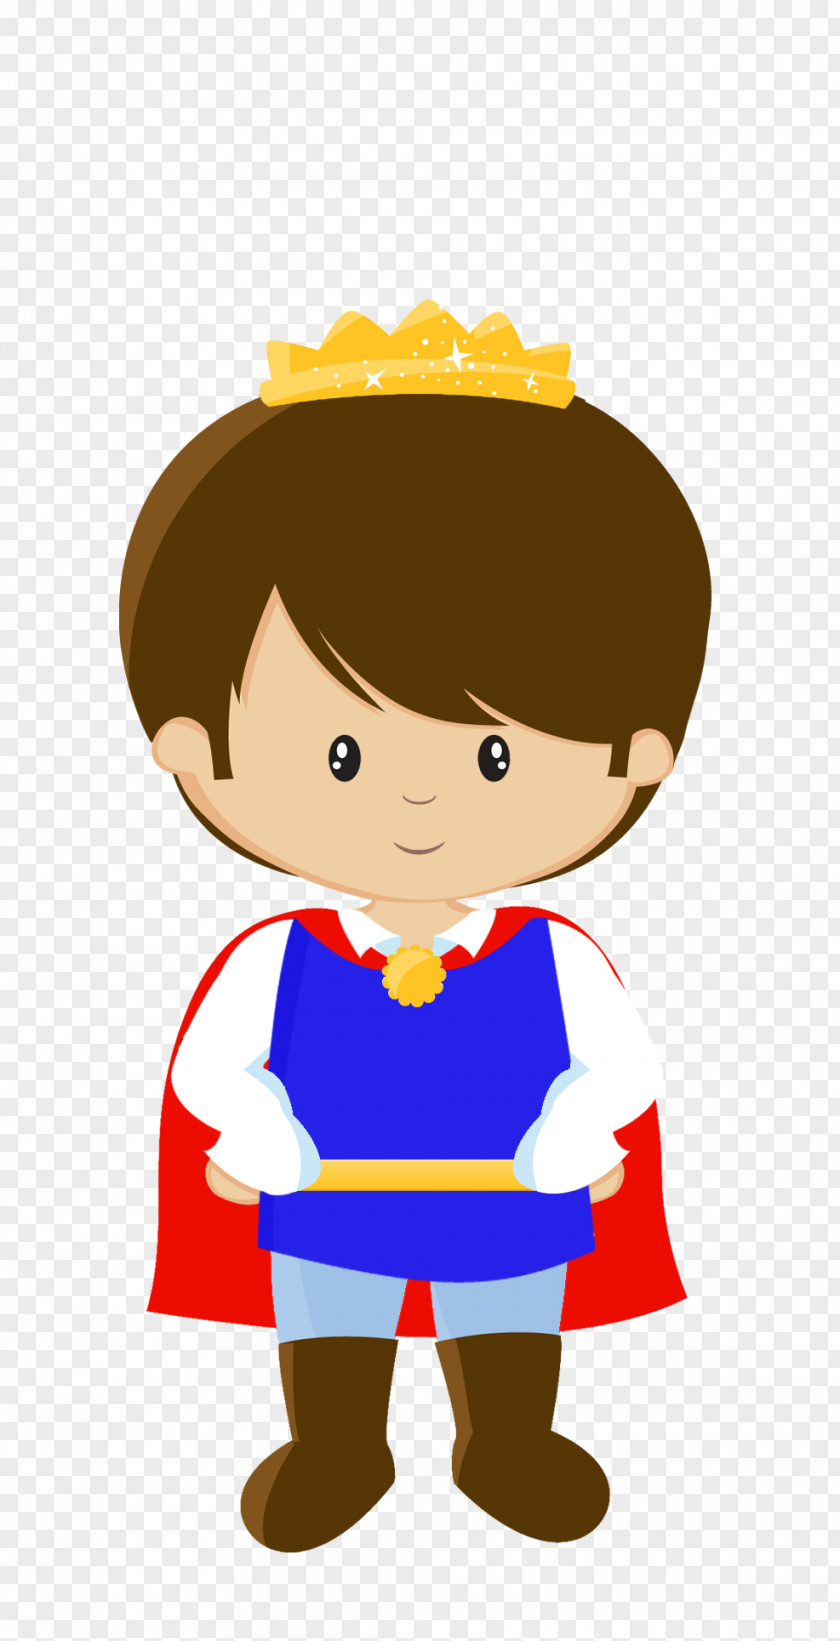 Snow White The Little Prince Clip Art PNG